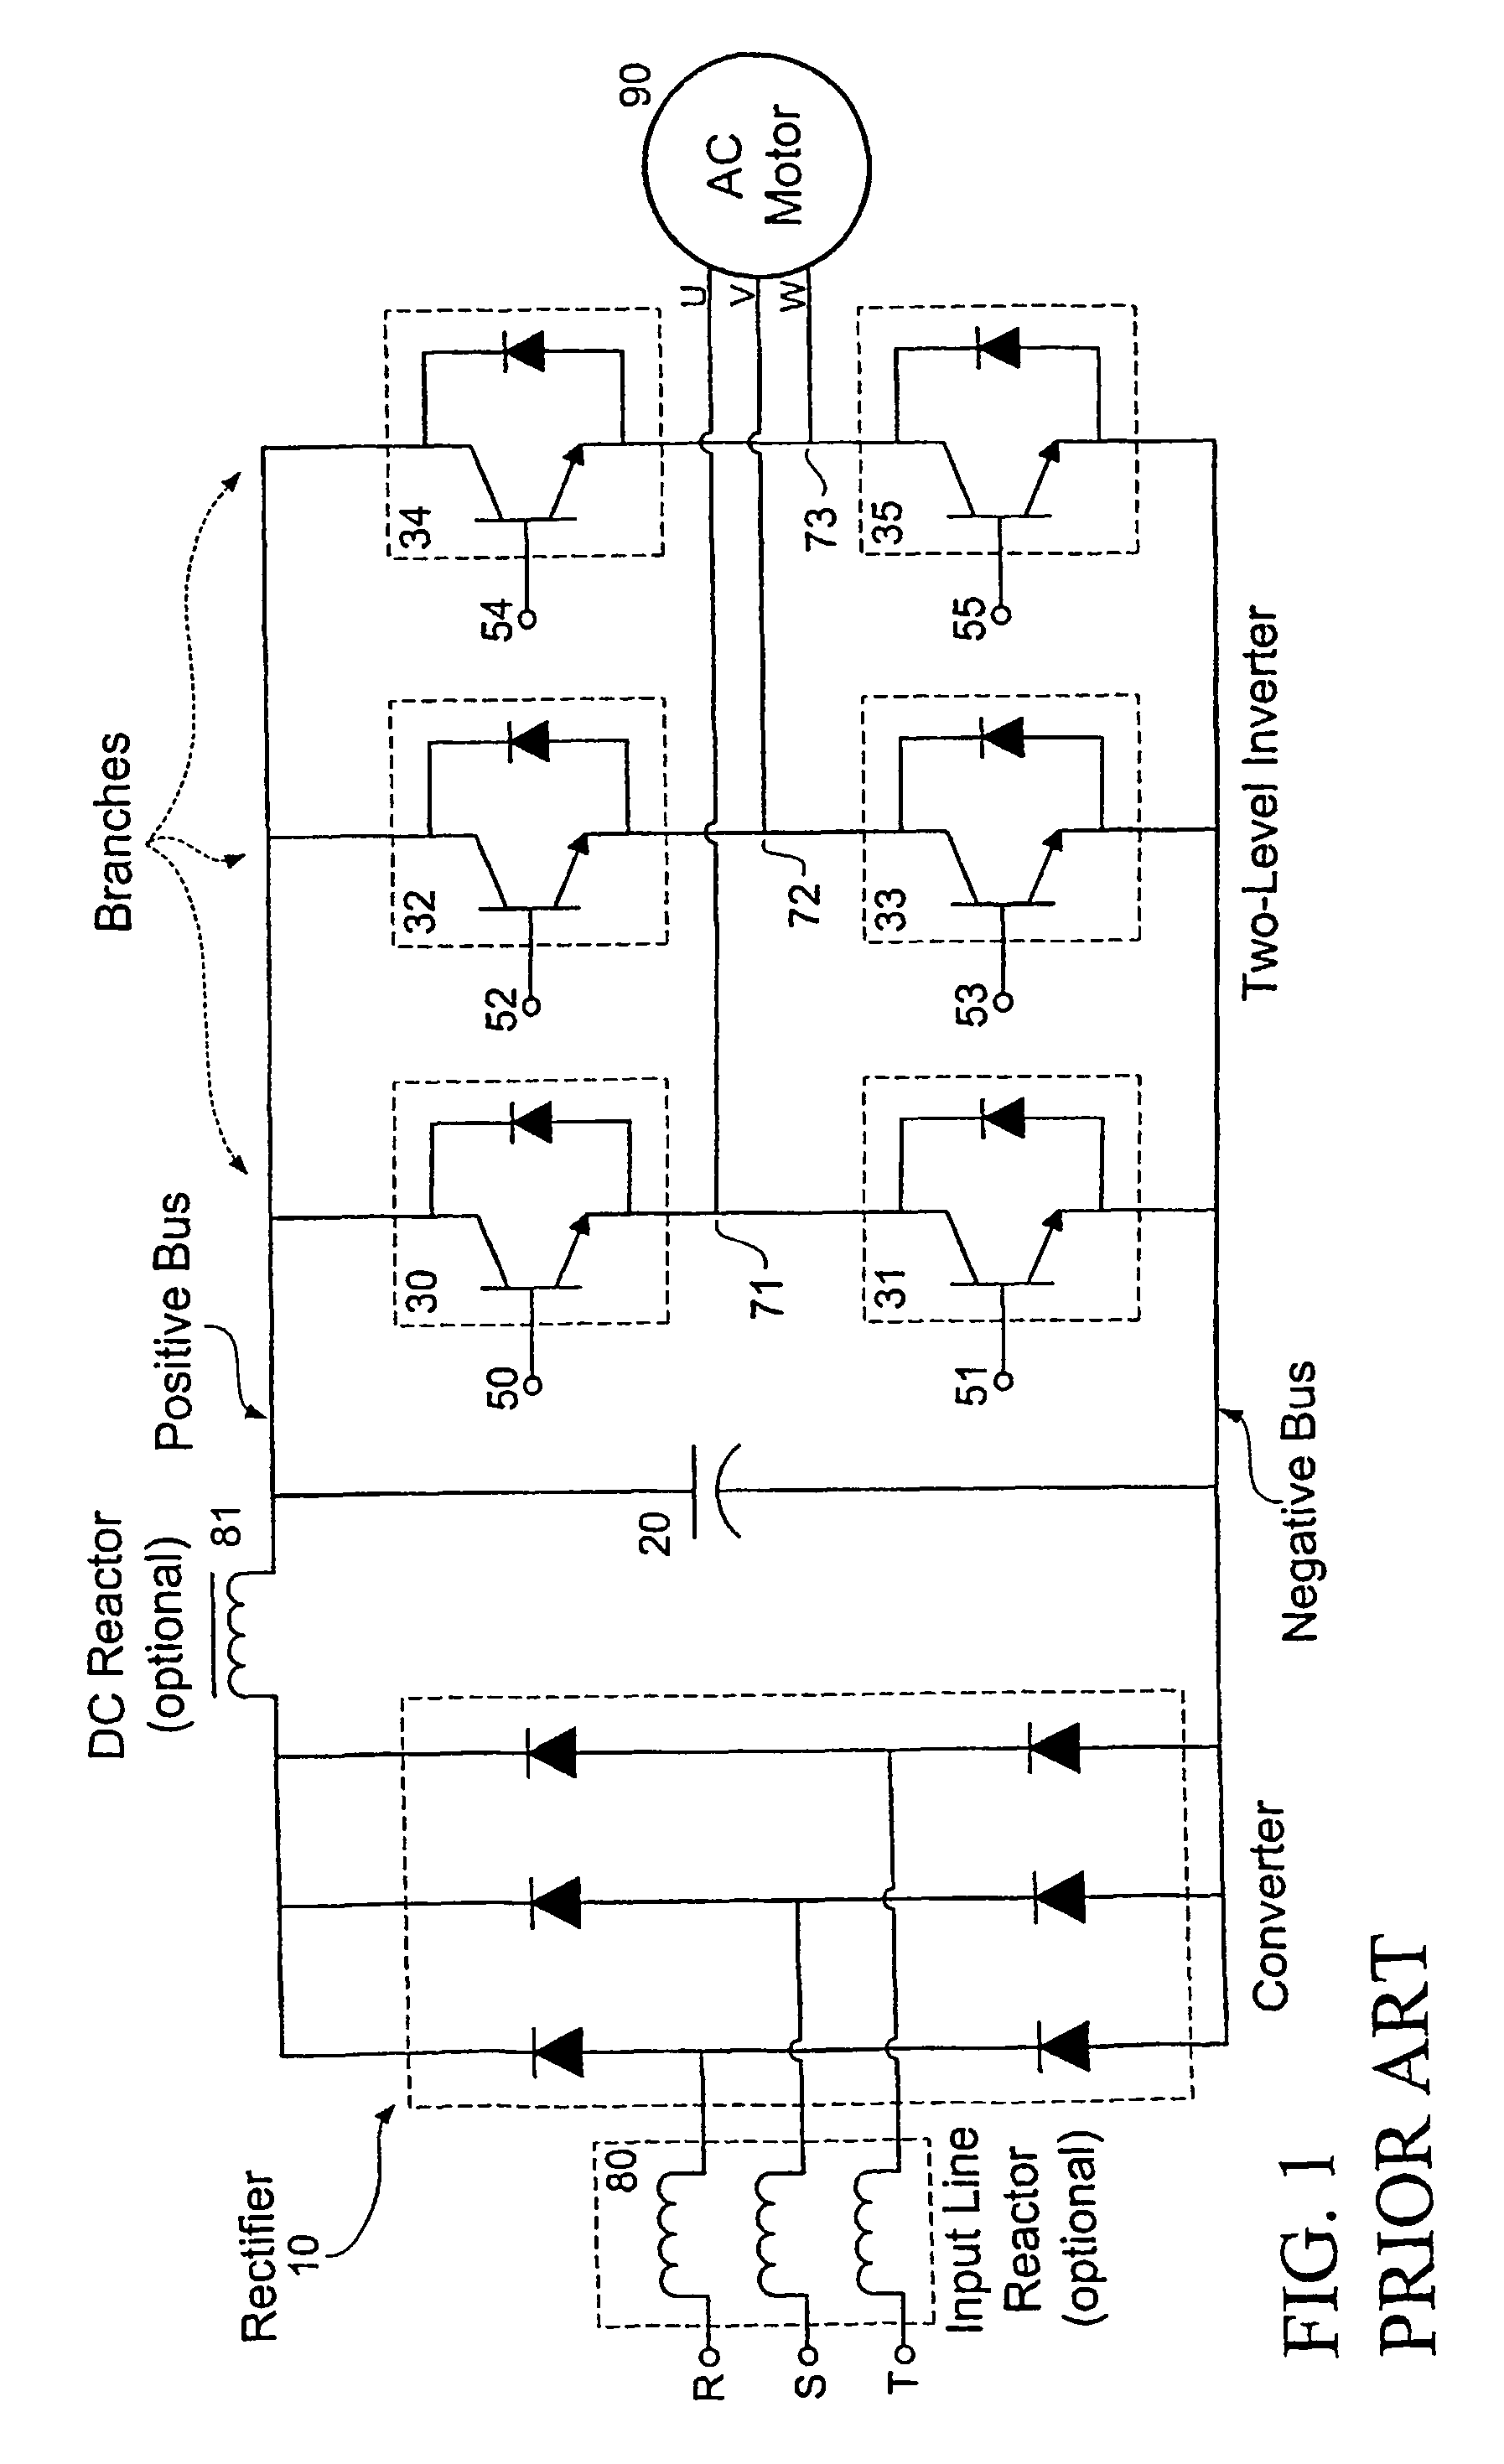 Low voltage, two-level, six-pulse induction motor controller driving a medium-to-high voltage, three-or-more-level AC drive inverter bridge